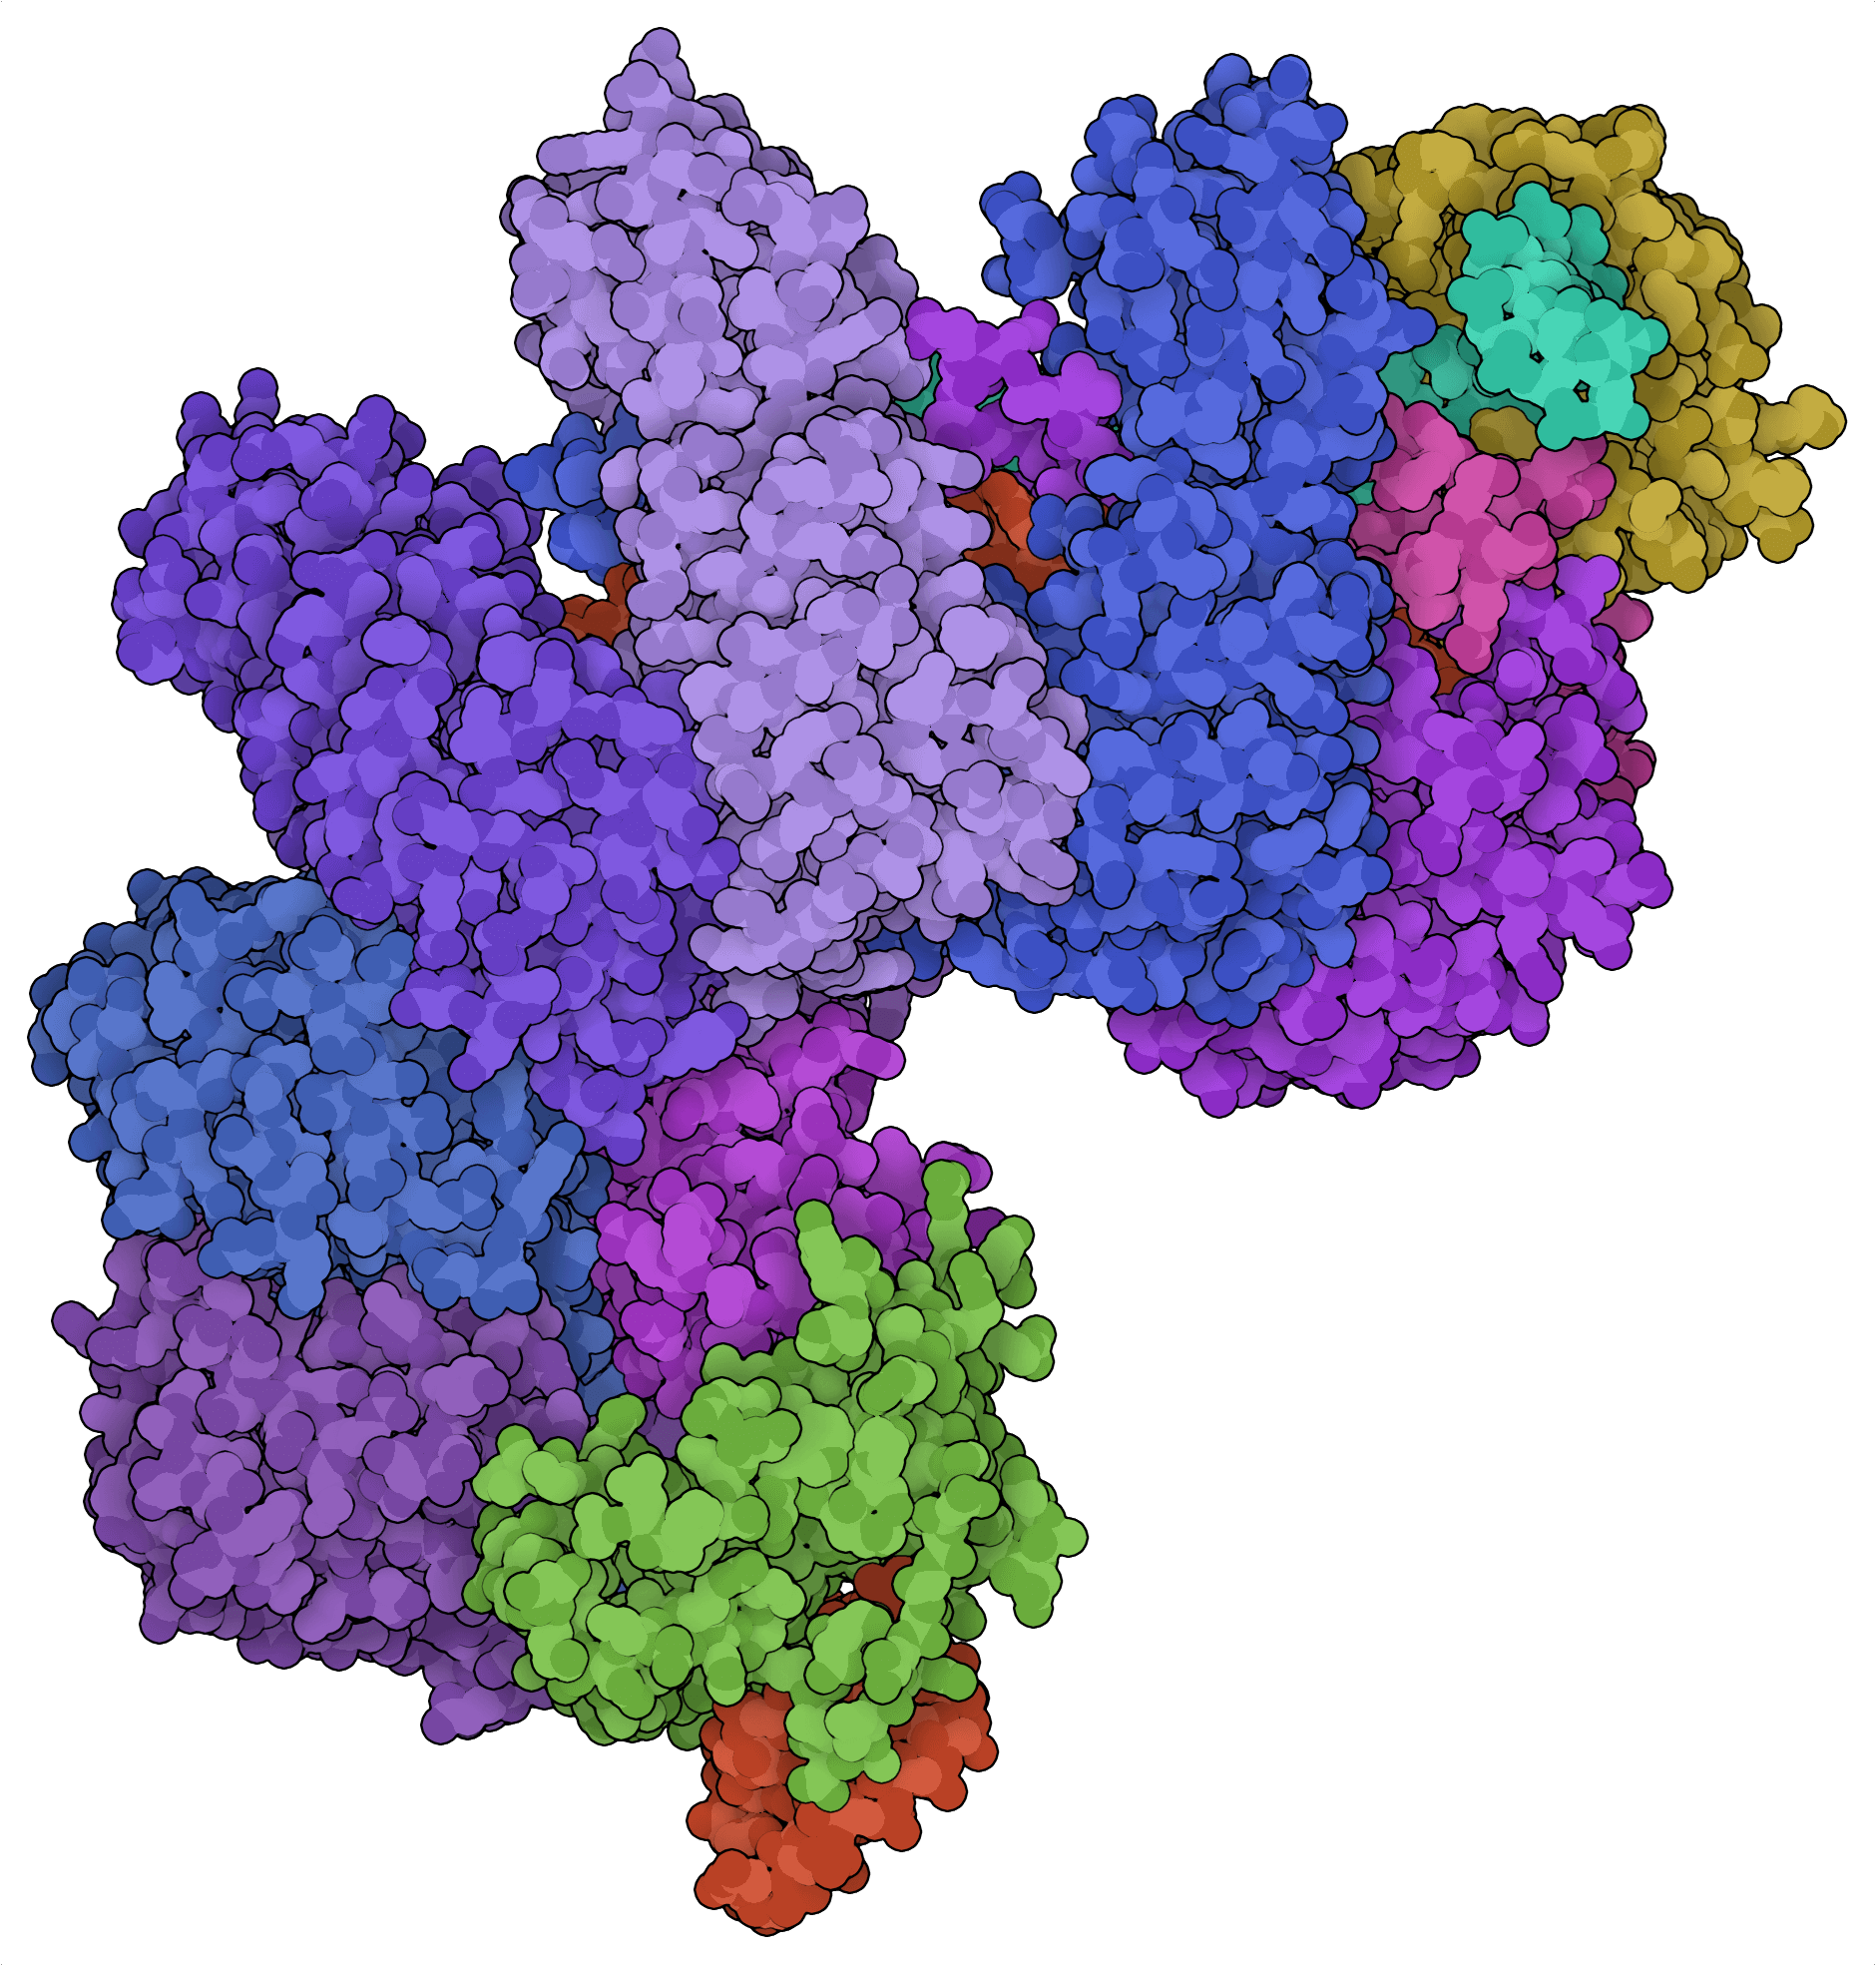 Protein Structure of TfCascade